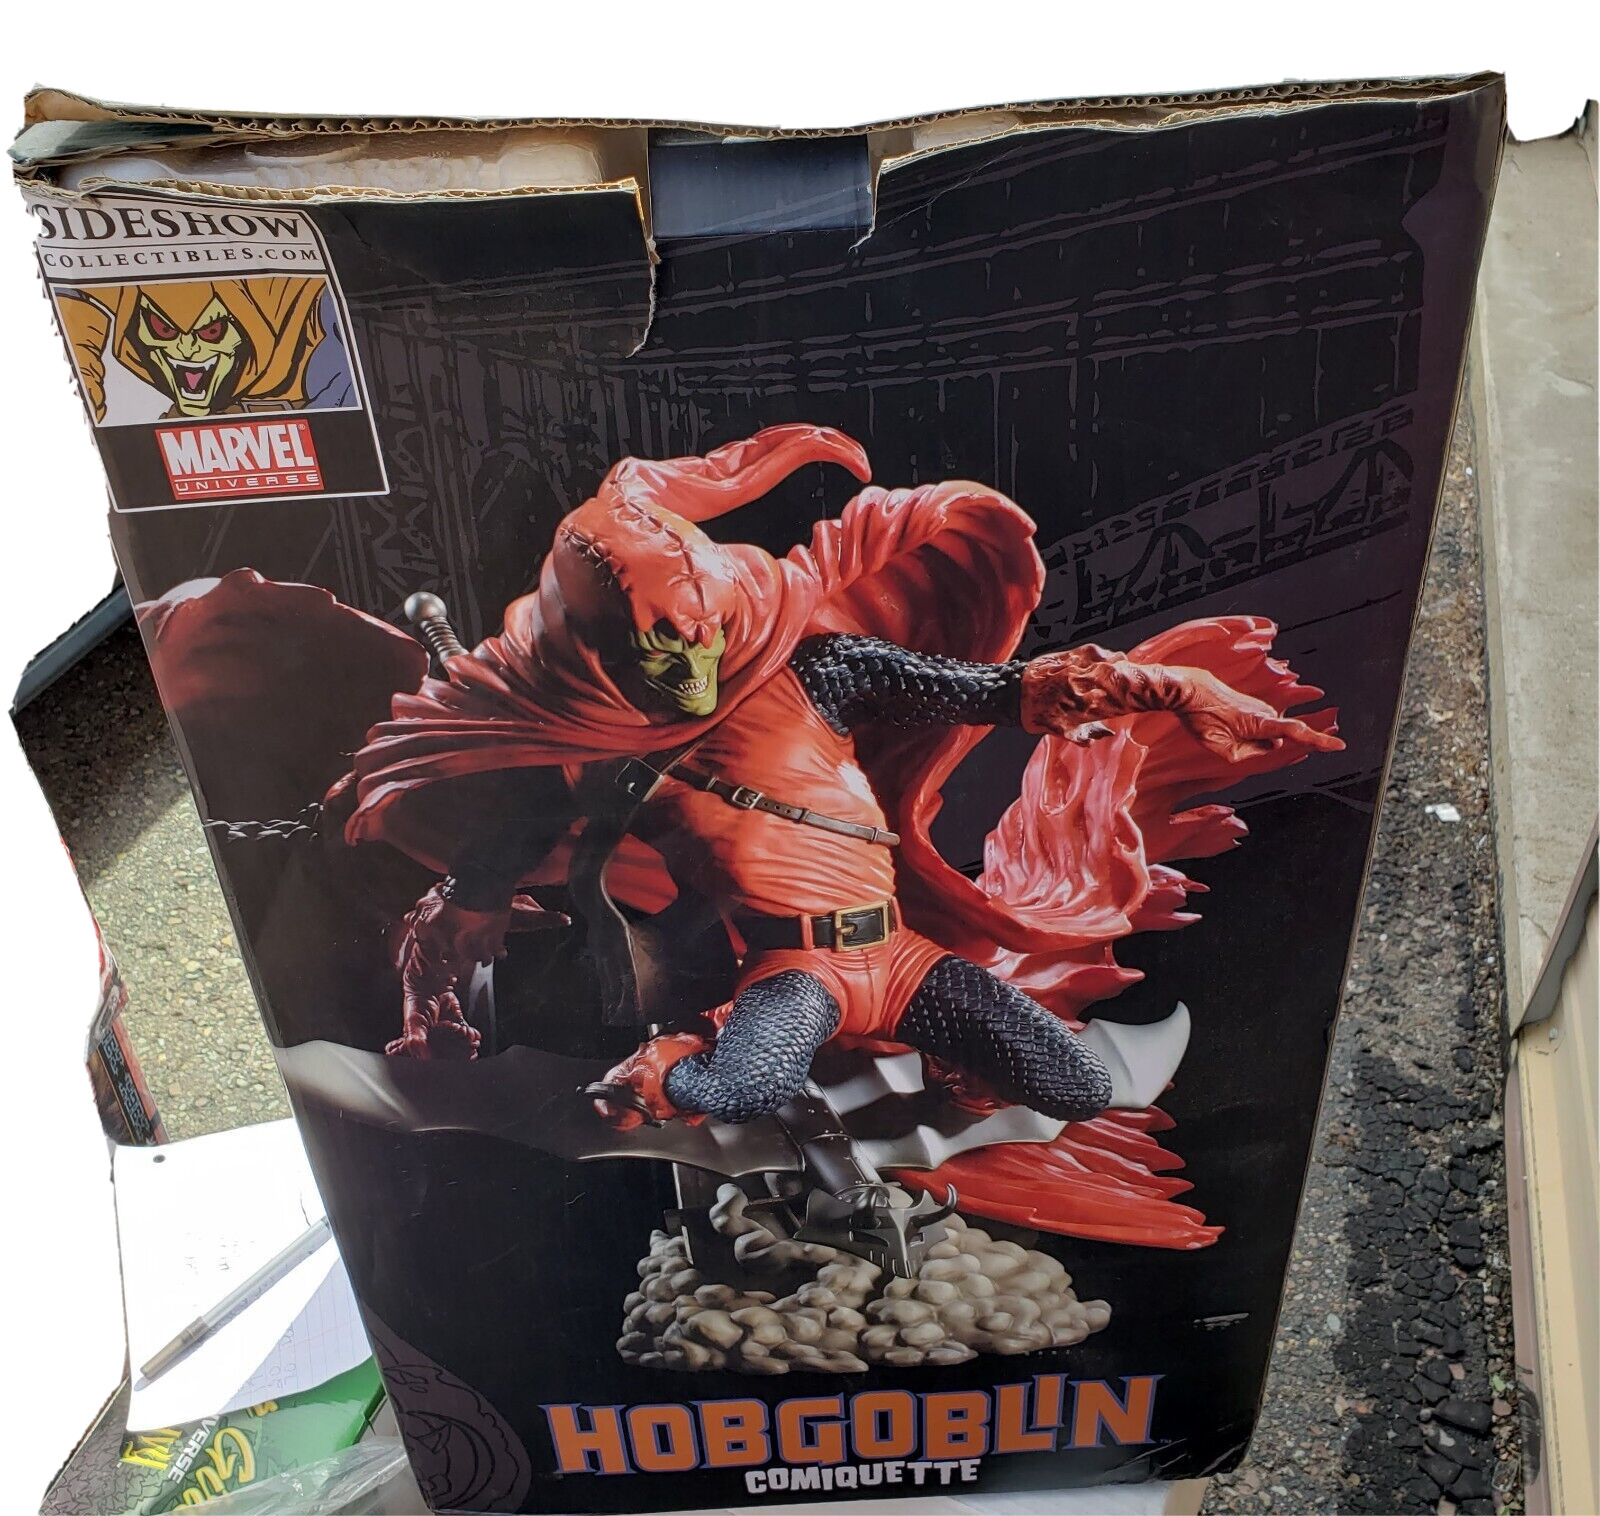 Hobgoblin Comiquette Statue Sideshow Collectibles Number 68/500 OOP Rare